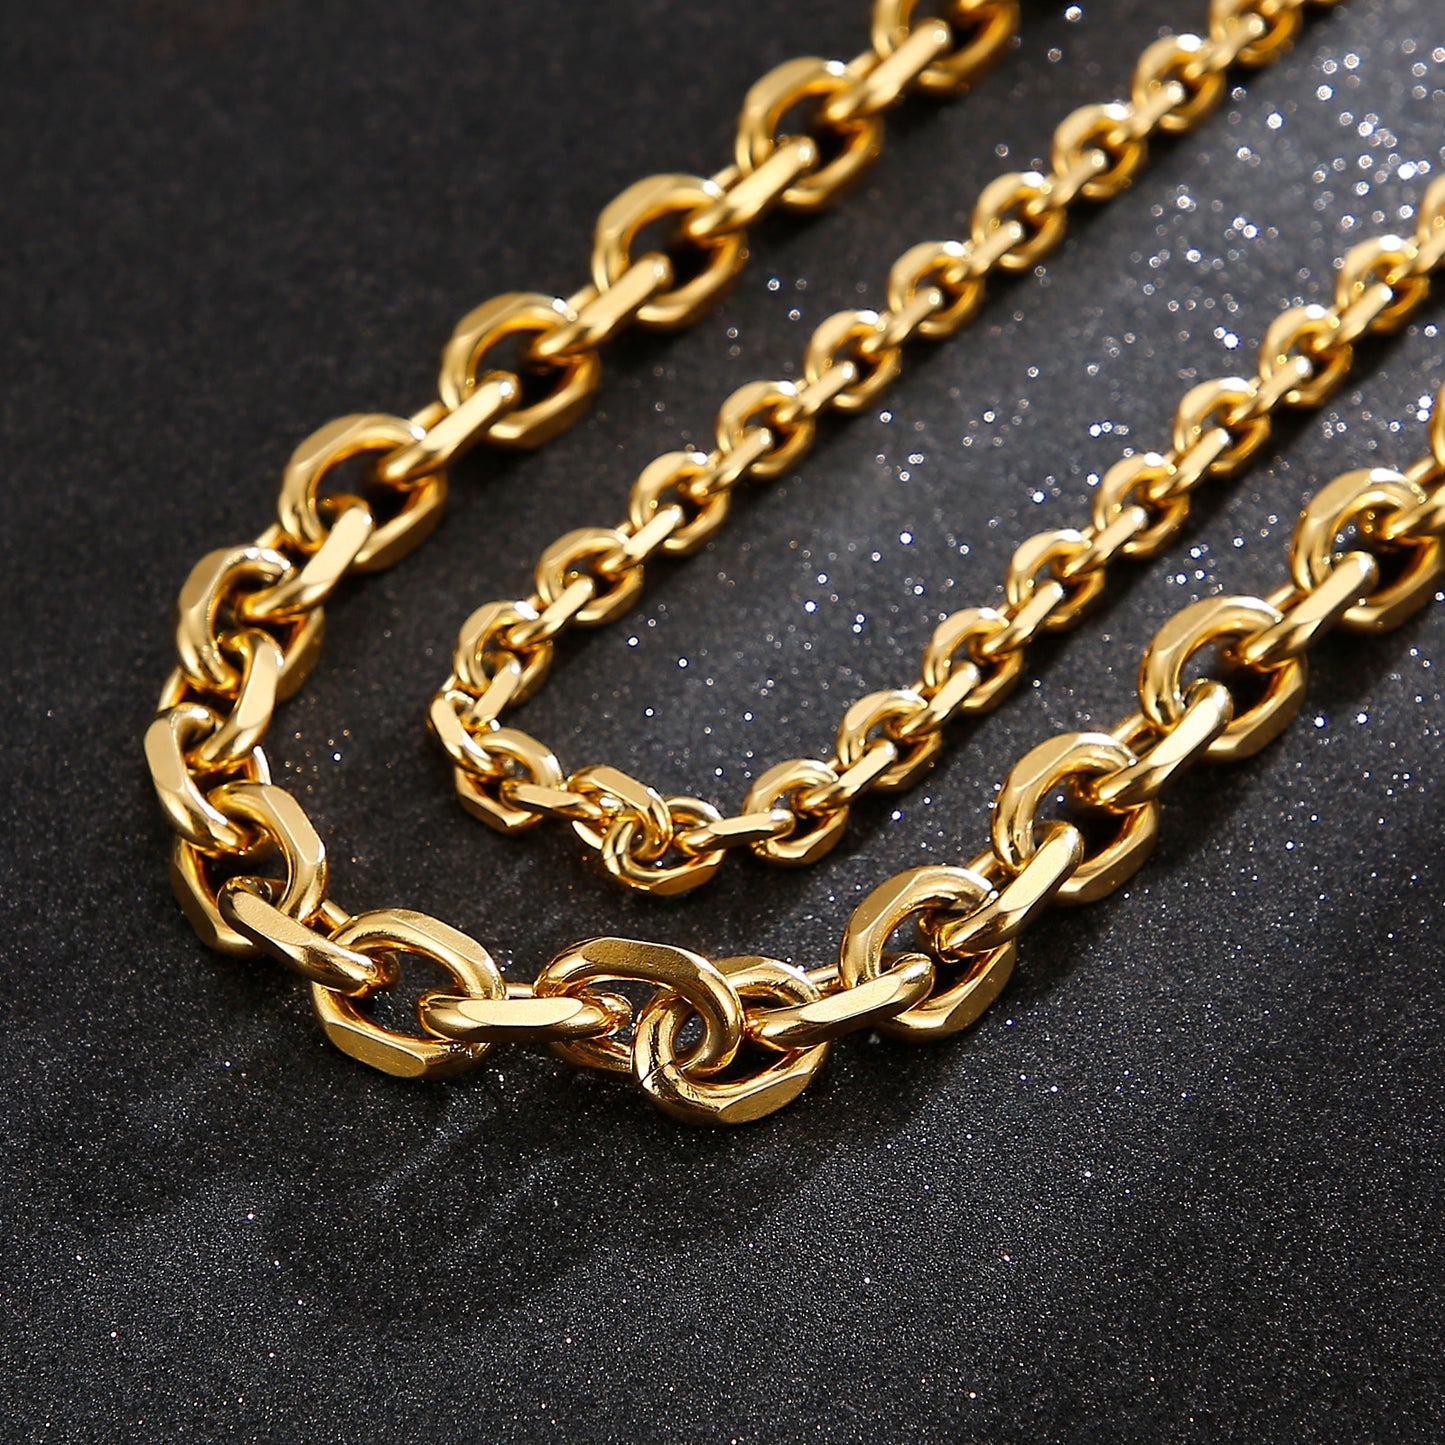 Oval Rolo Link Chain Necklace